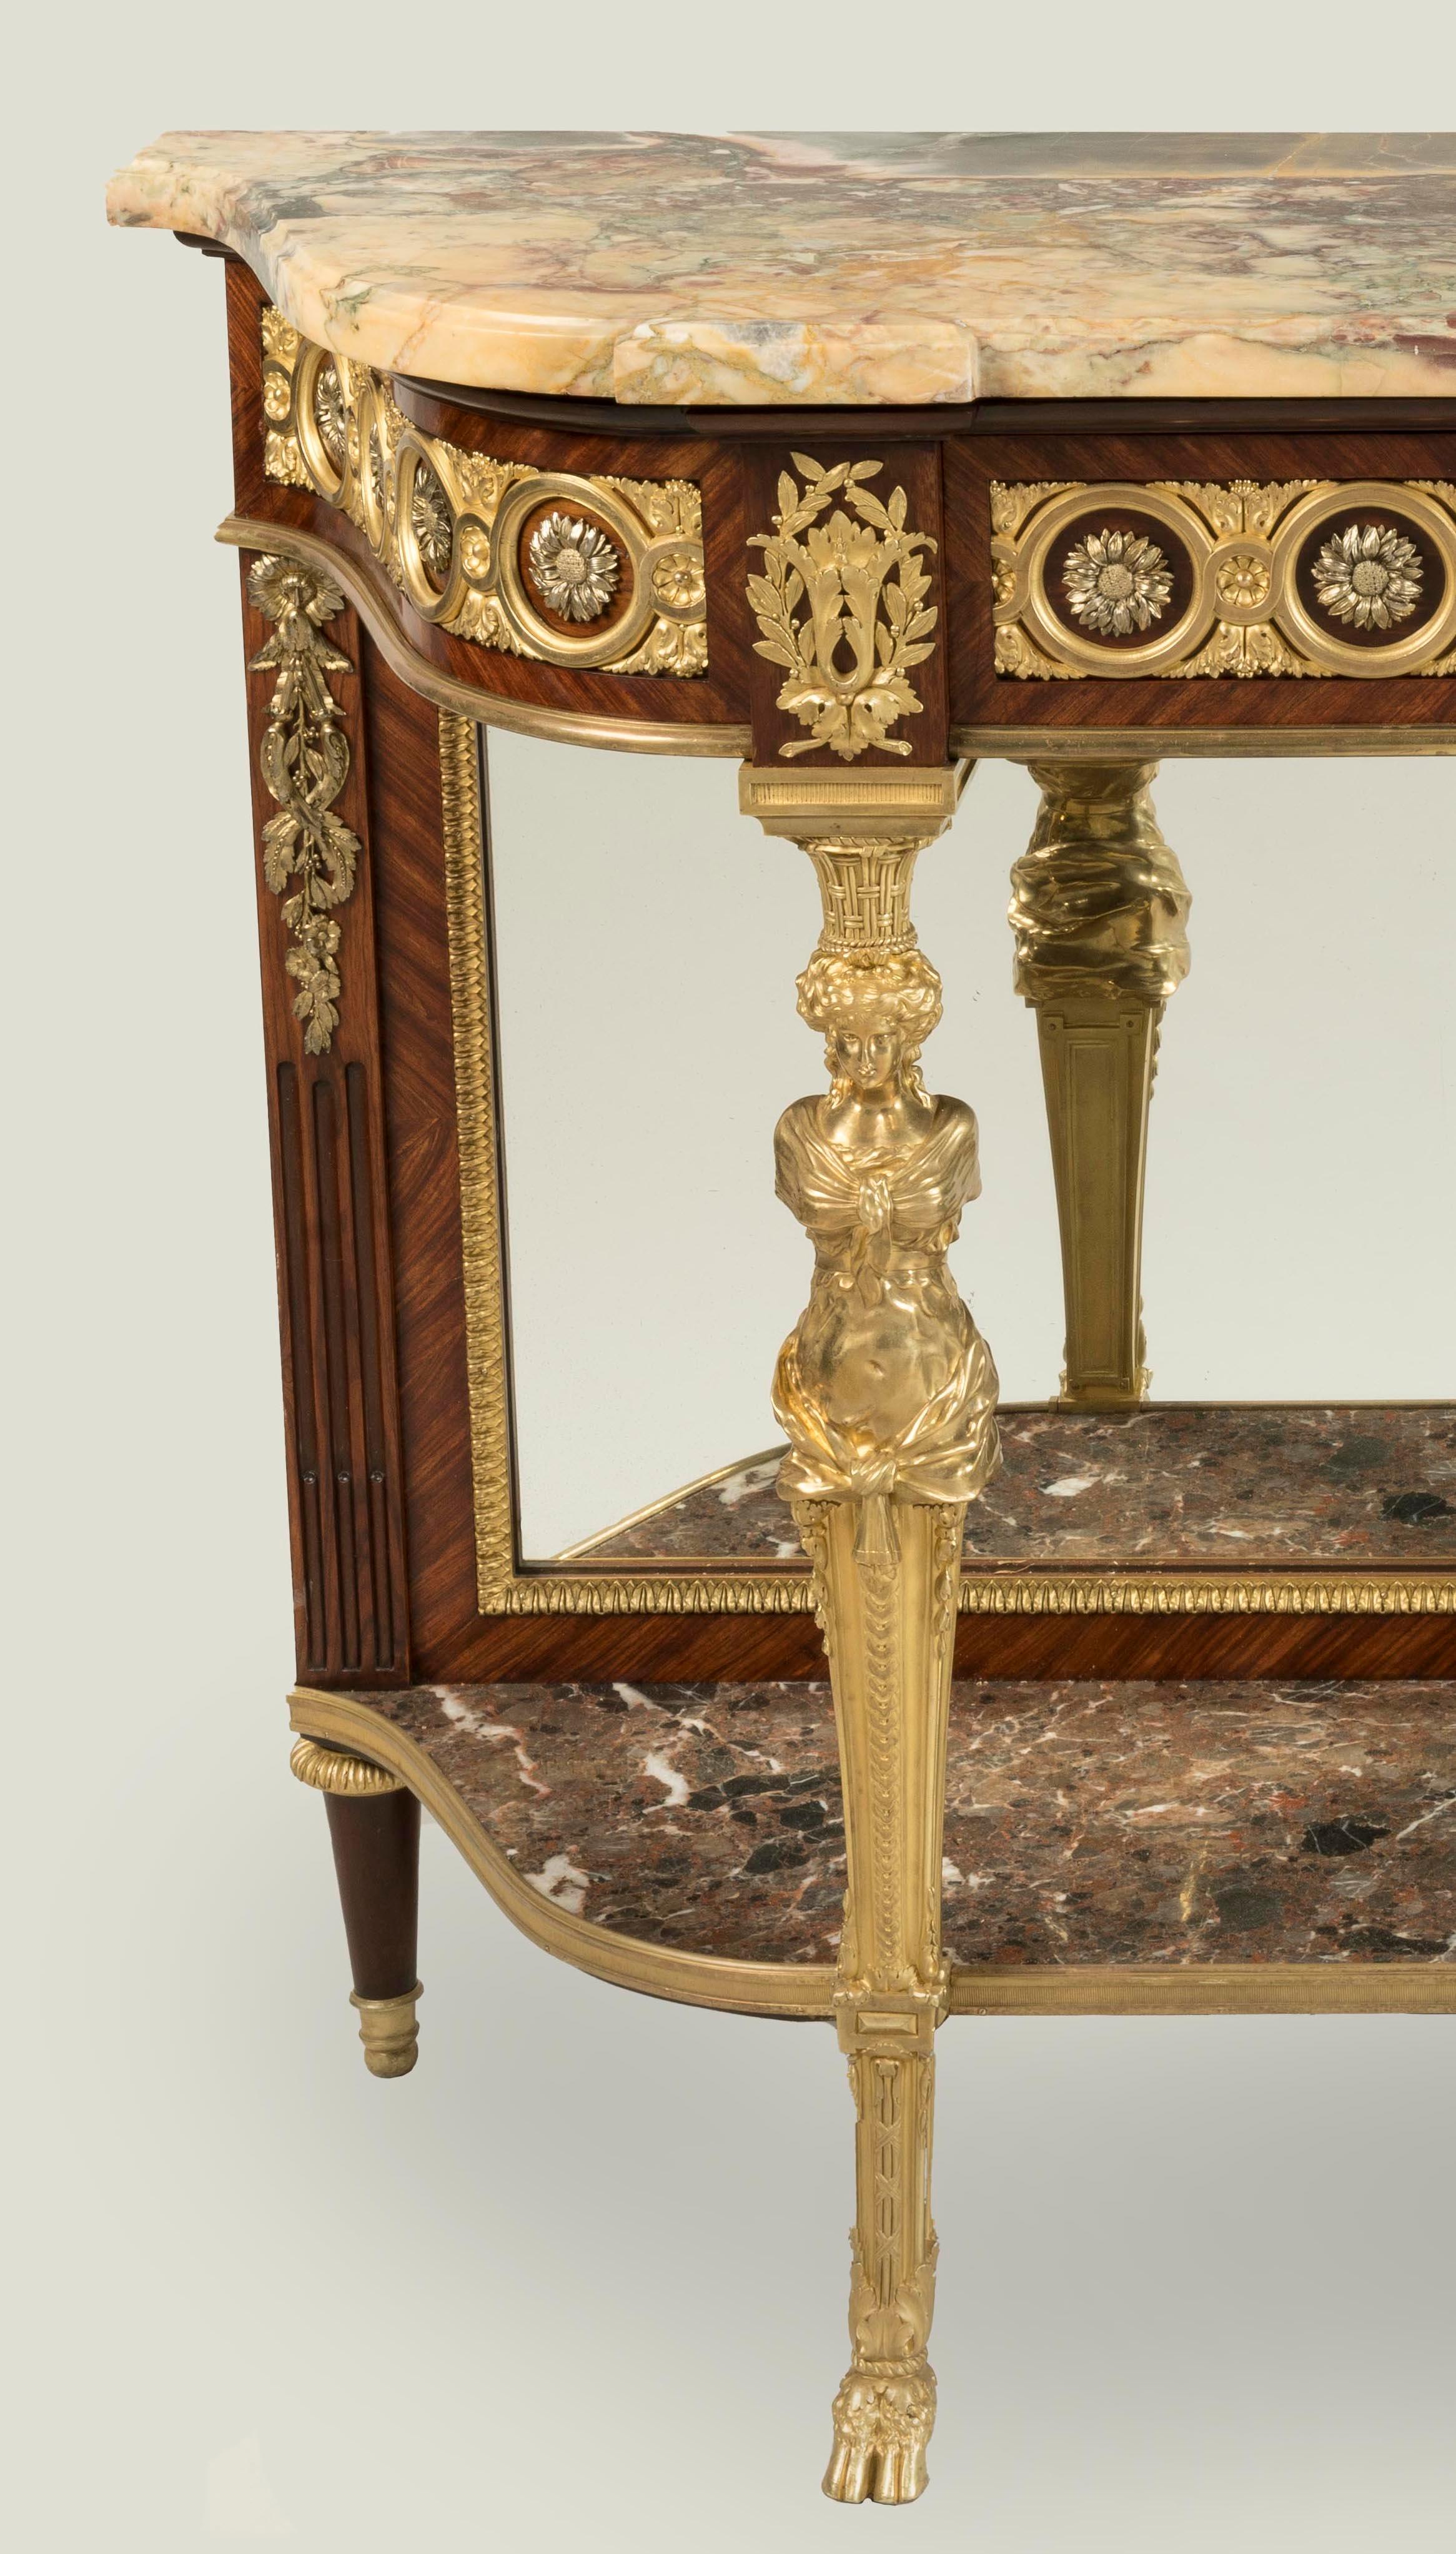 19th Century French Ormolu-Mounted Kingwood Console Table in the Louis XVI Style For Sale 4